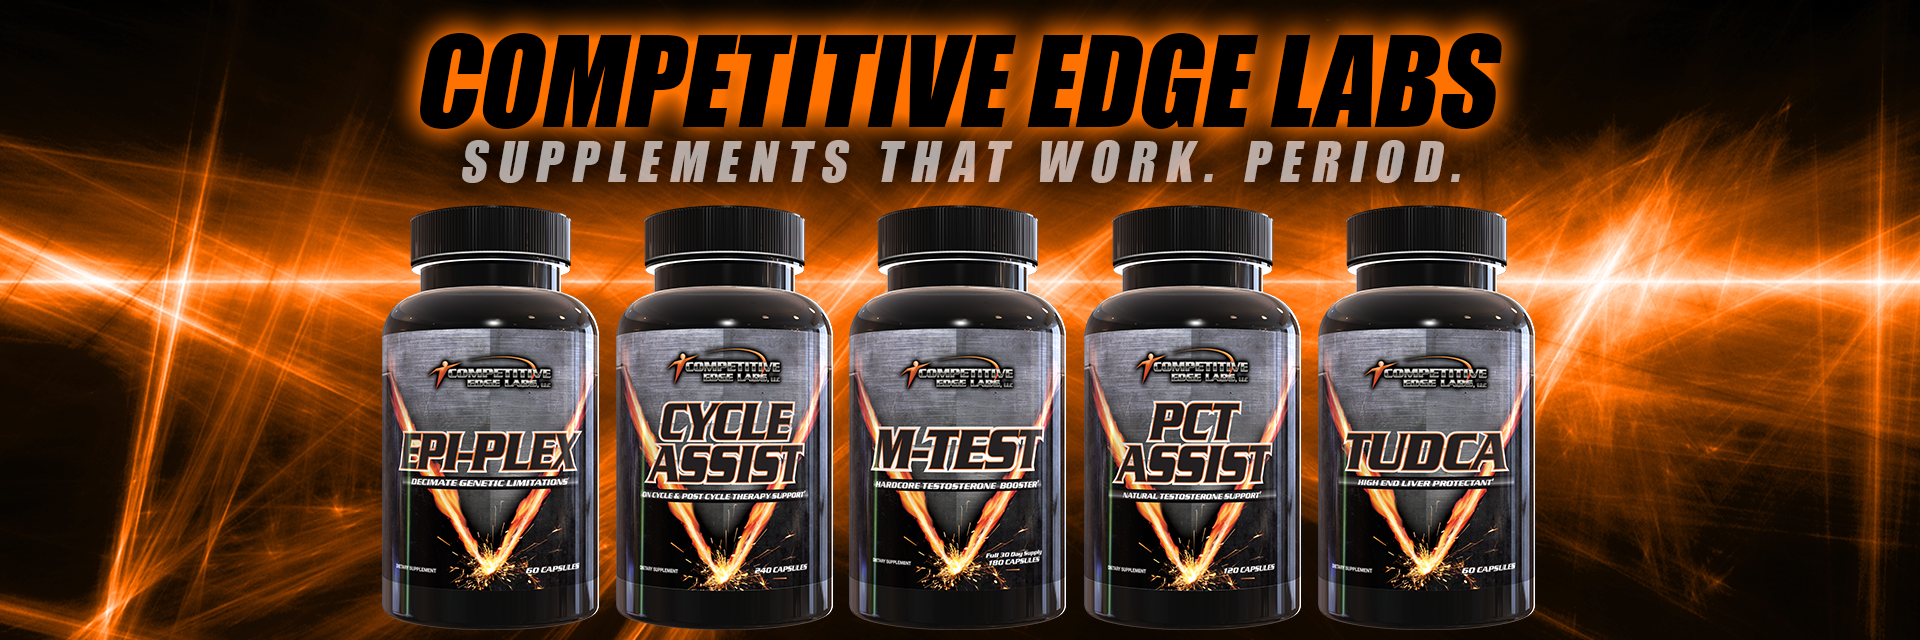 Competitive Edge Labs Product Bottles